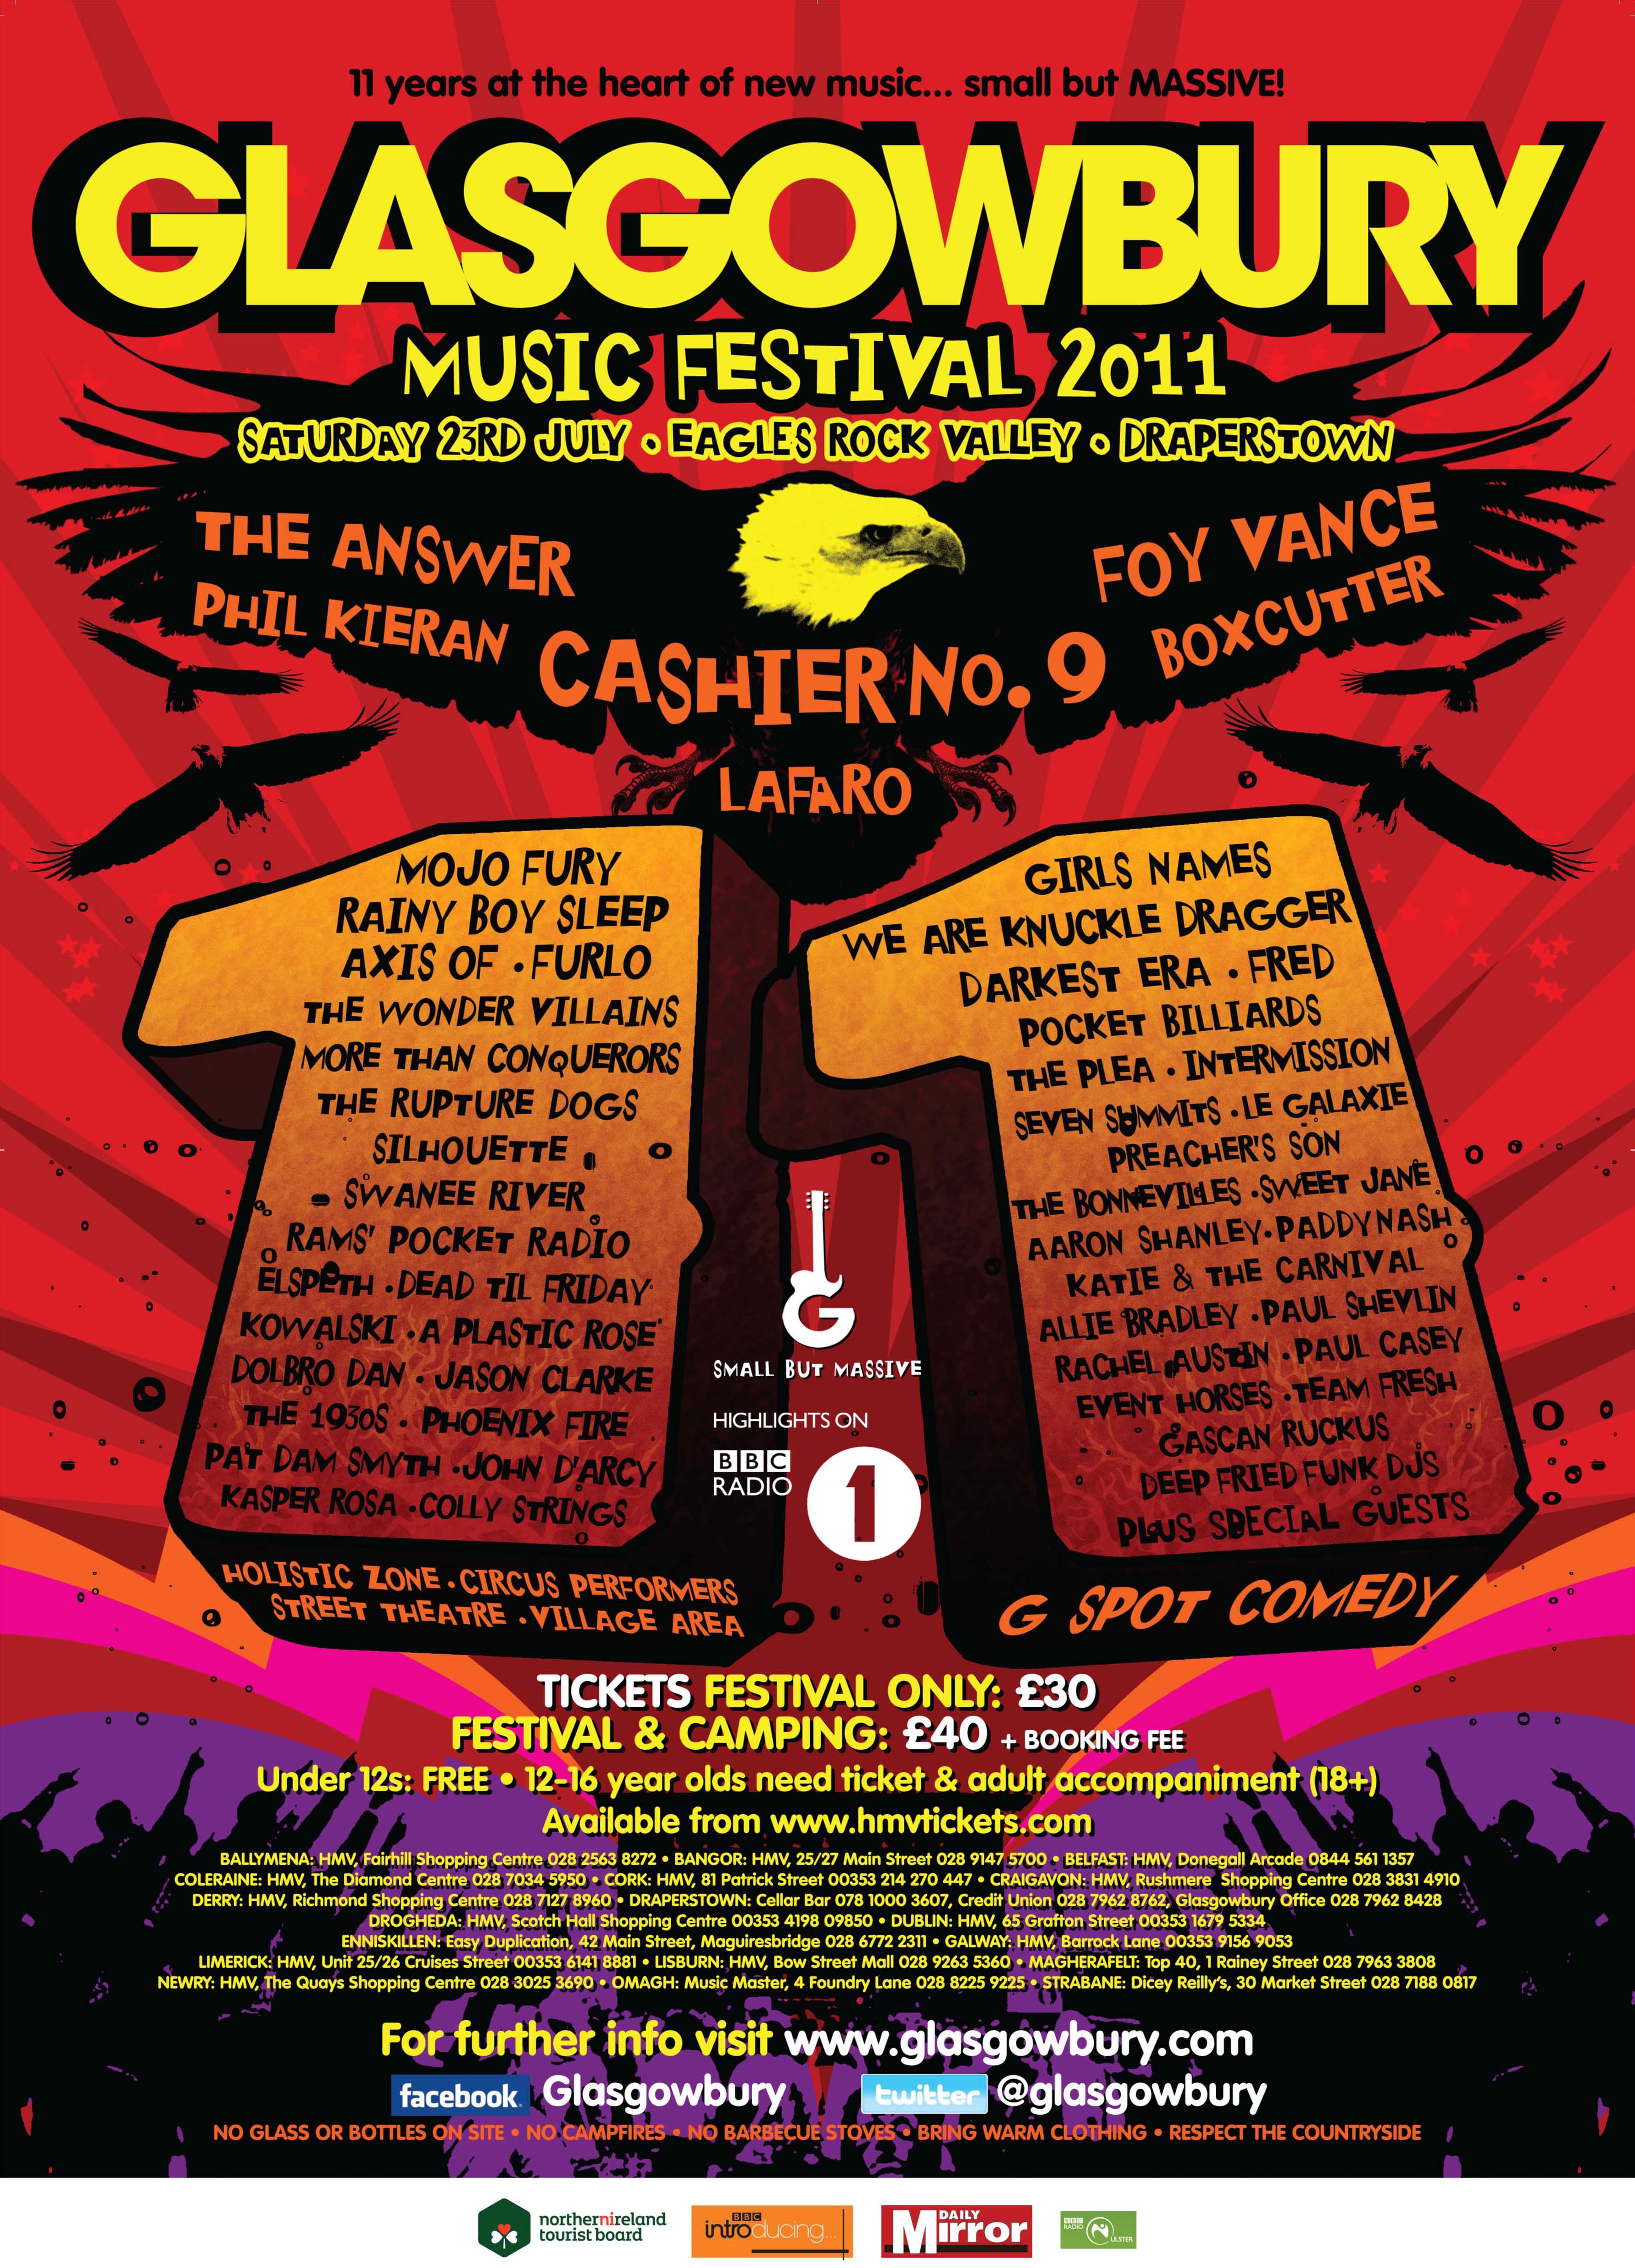 Download this year's poster design - Glasgowbury